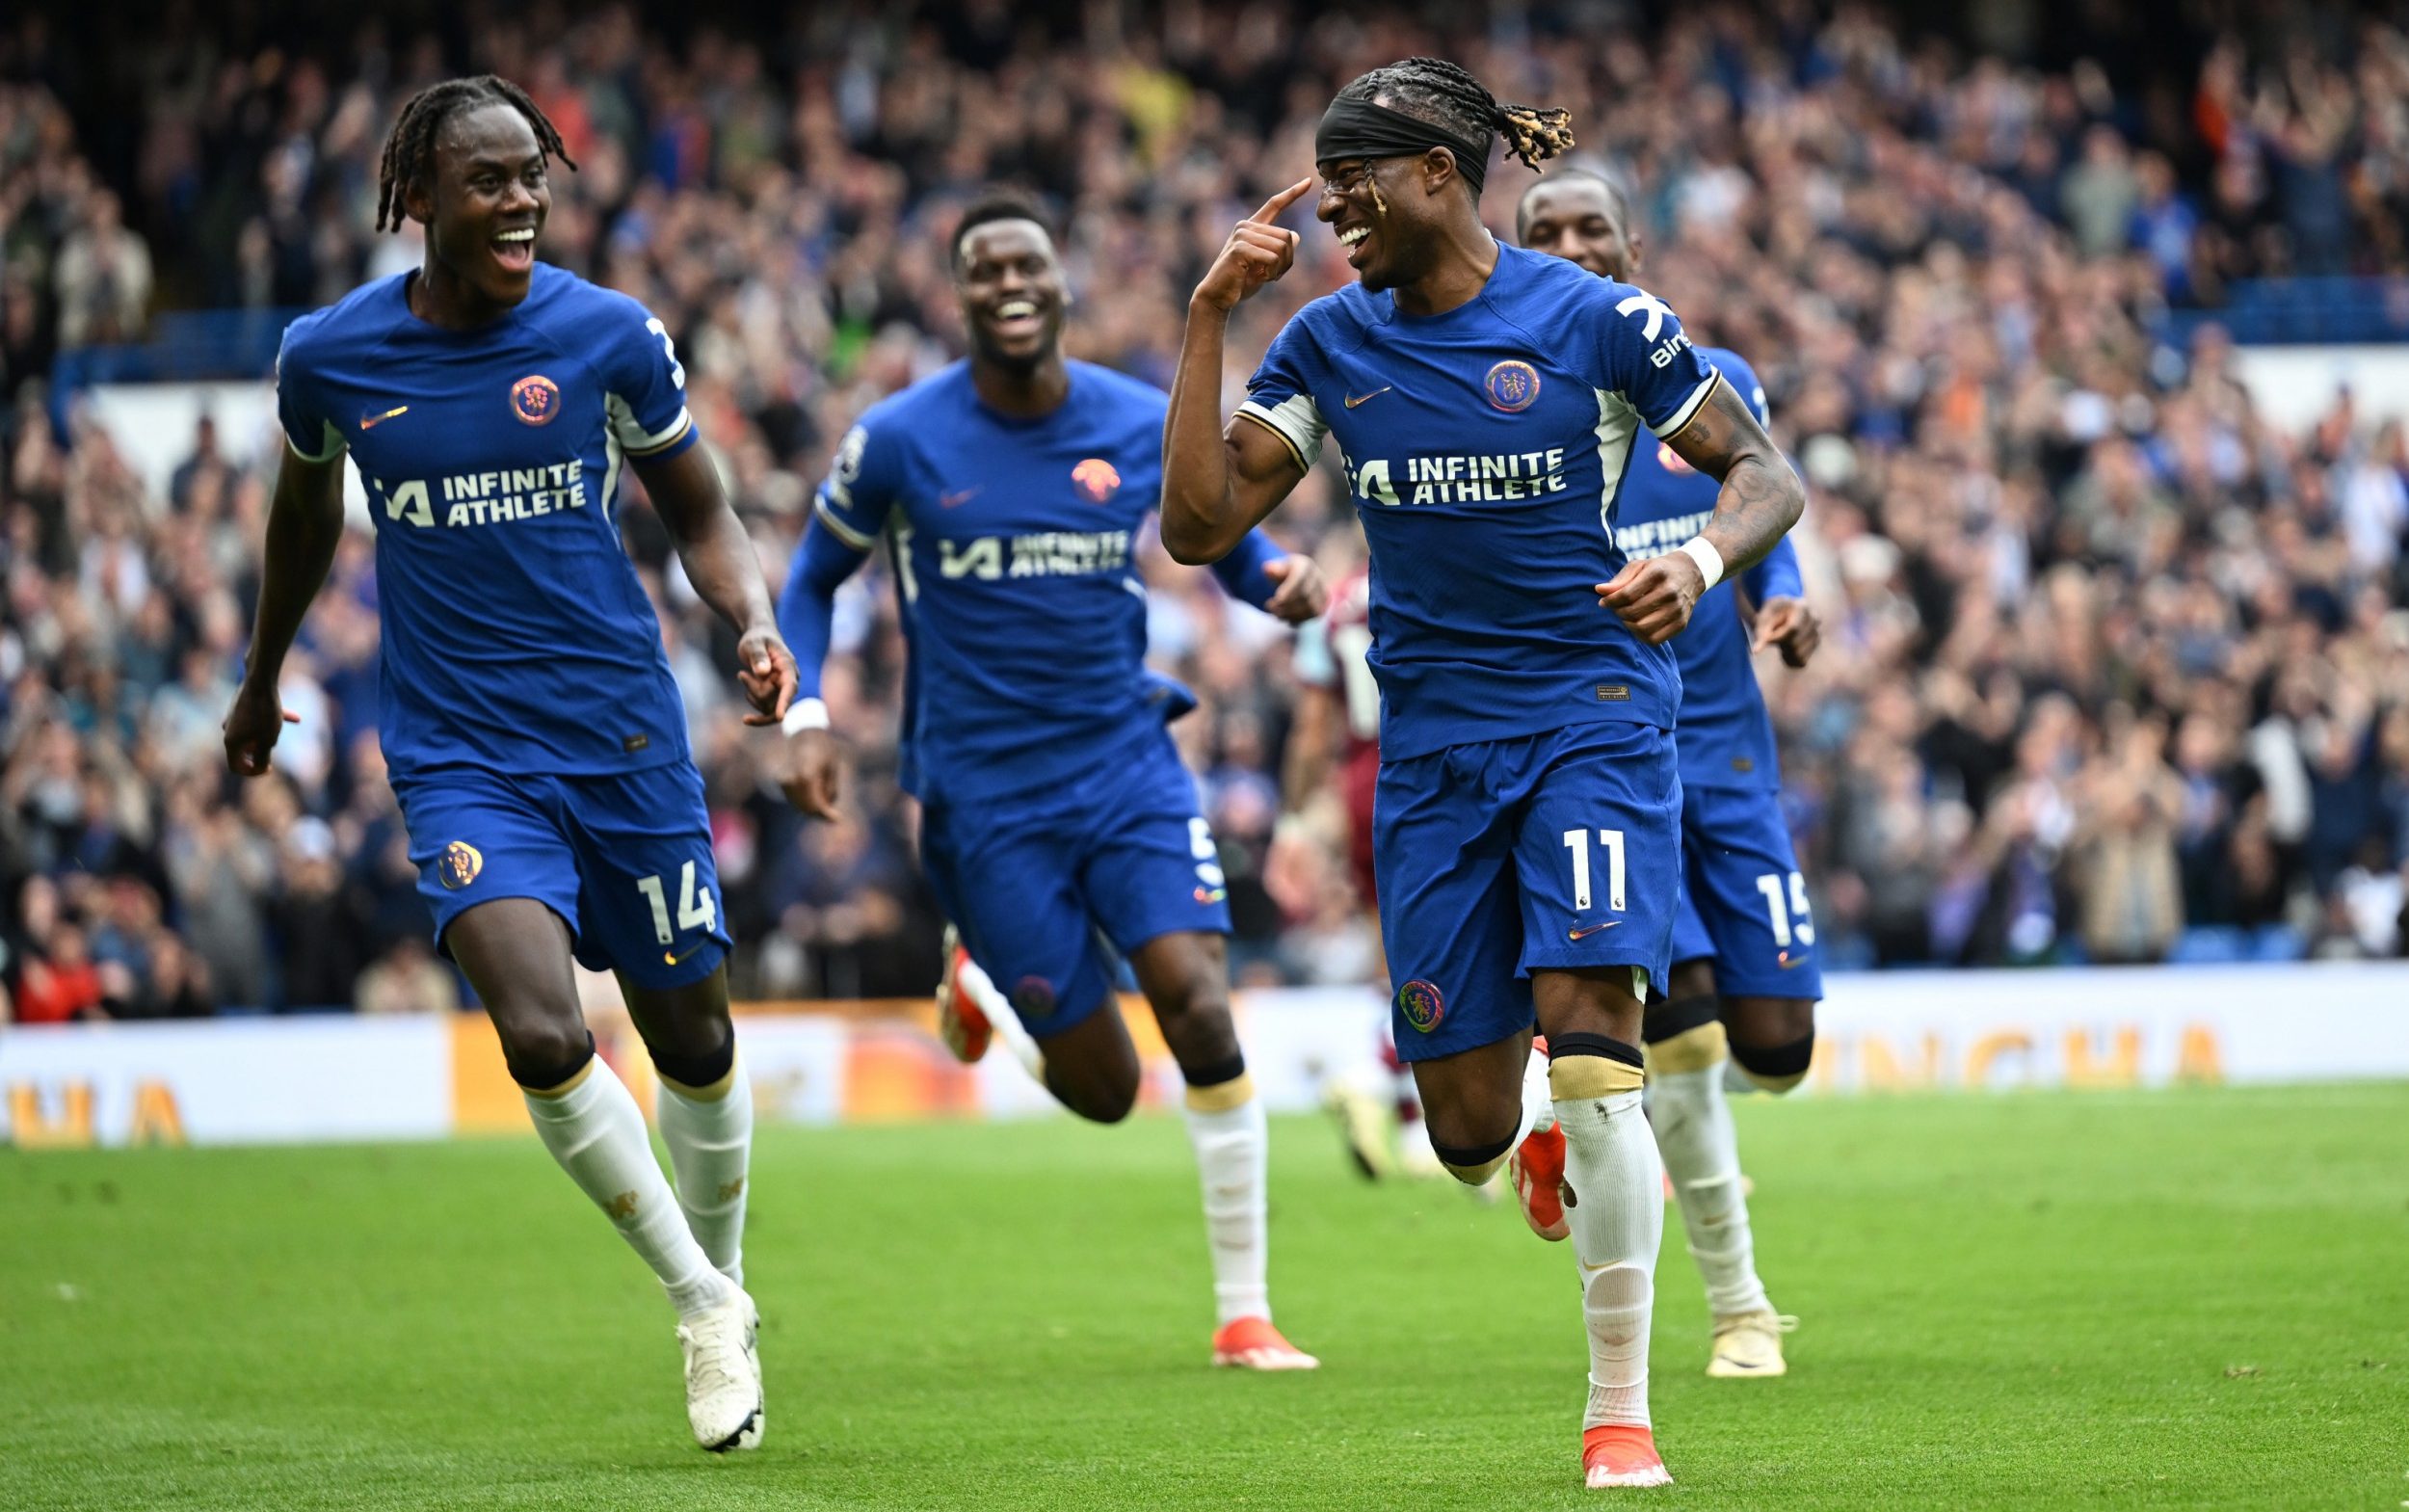 chelsea finally resembling a team – as long as owners don’t rip it up again